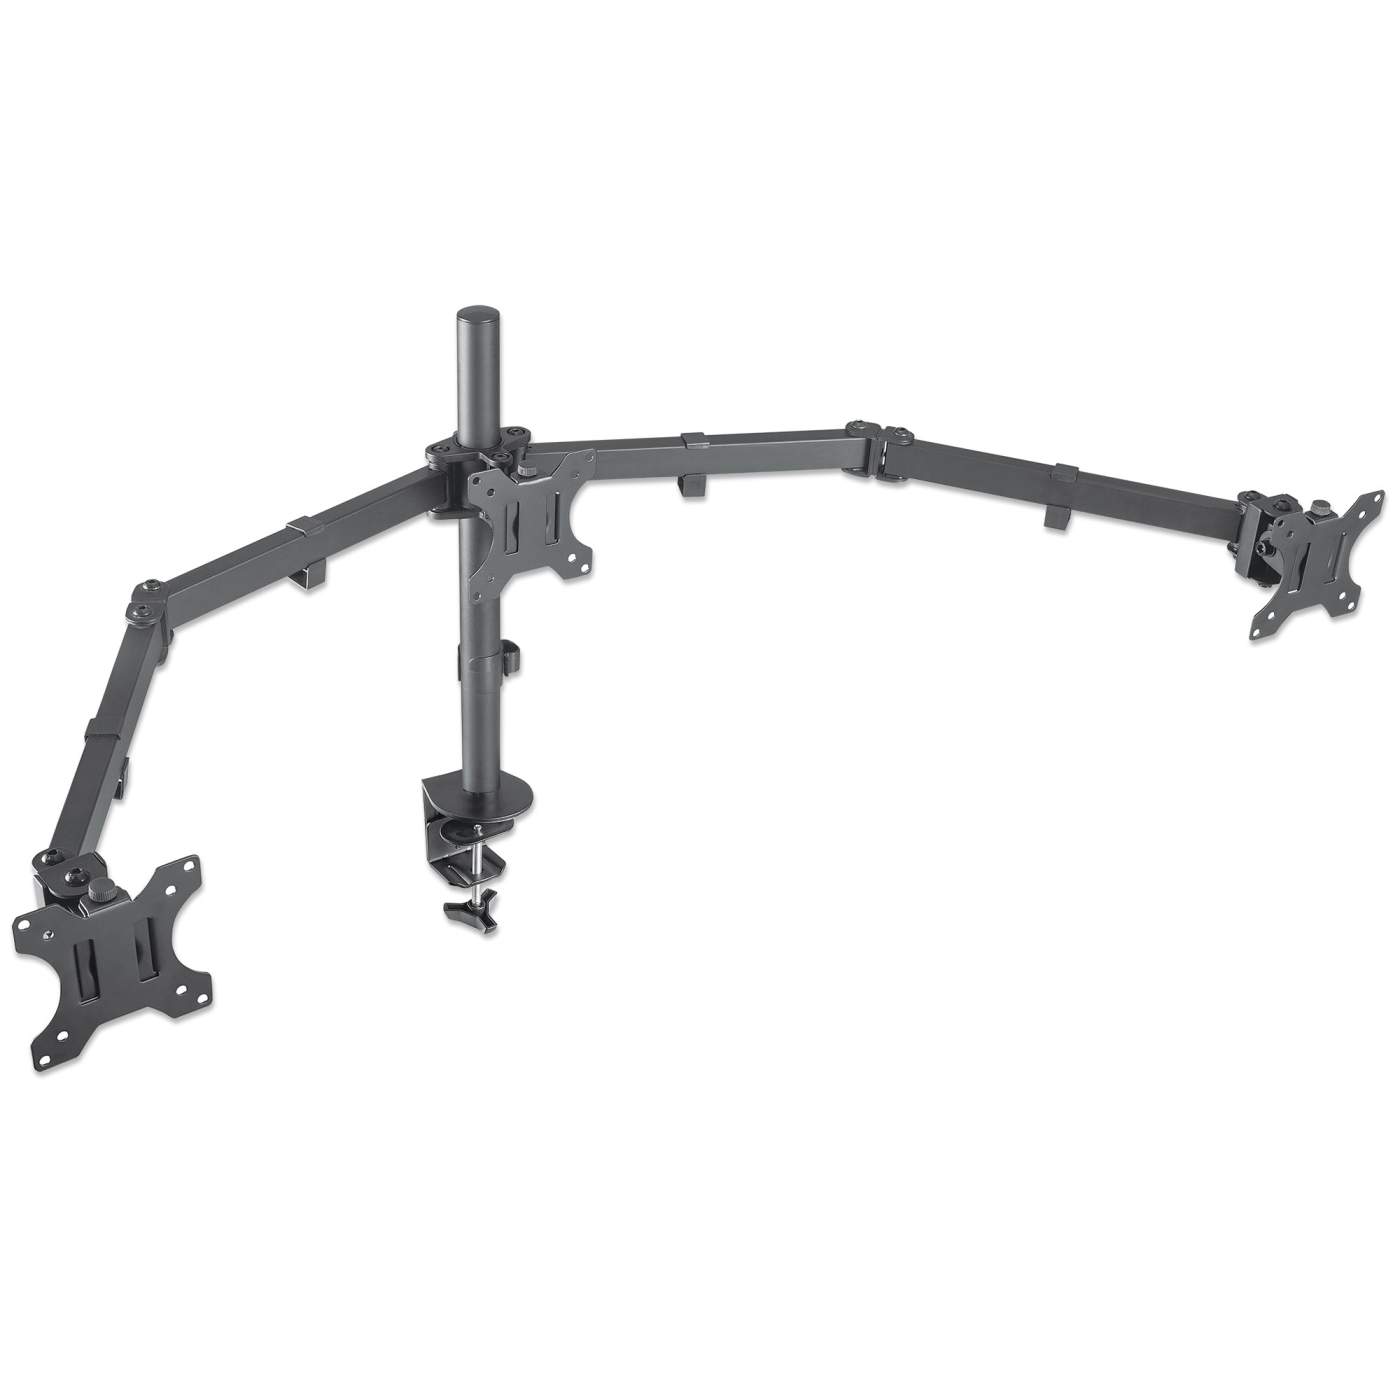 LCD Monitor Mount with Center Mount and Double-Link Swing Arms Image 2